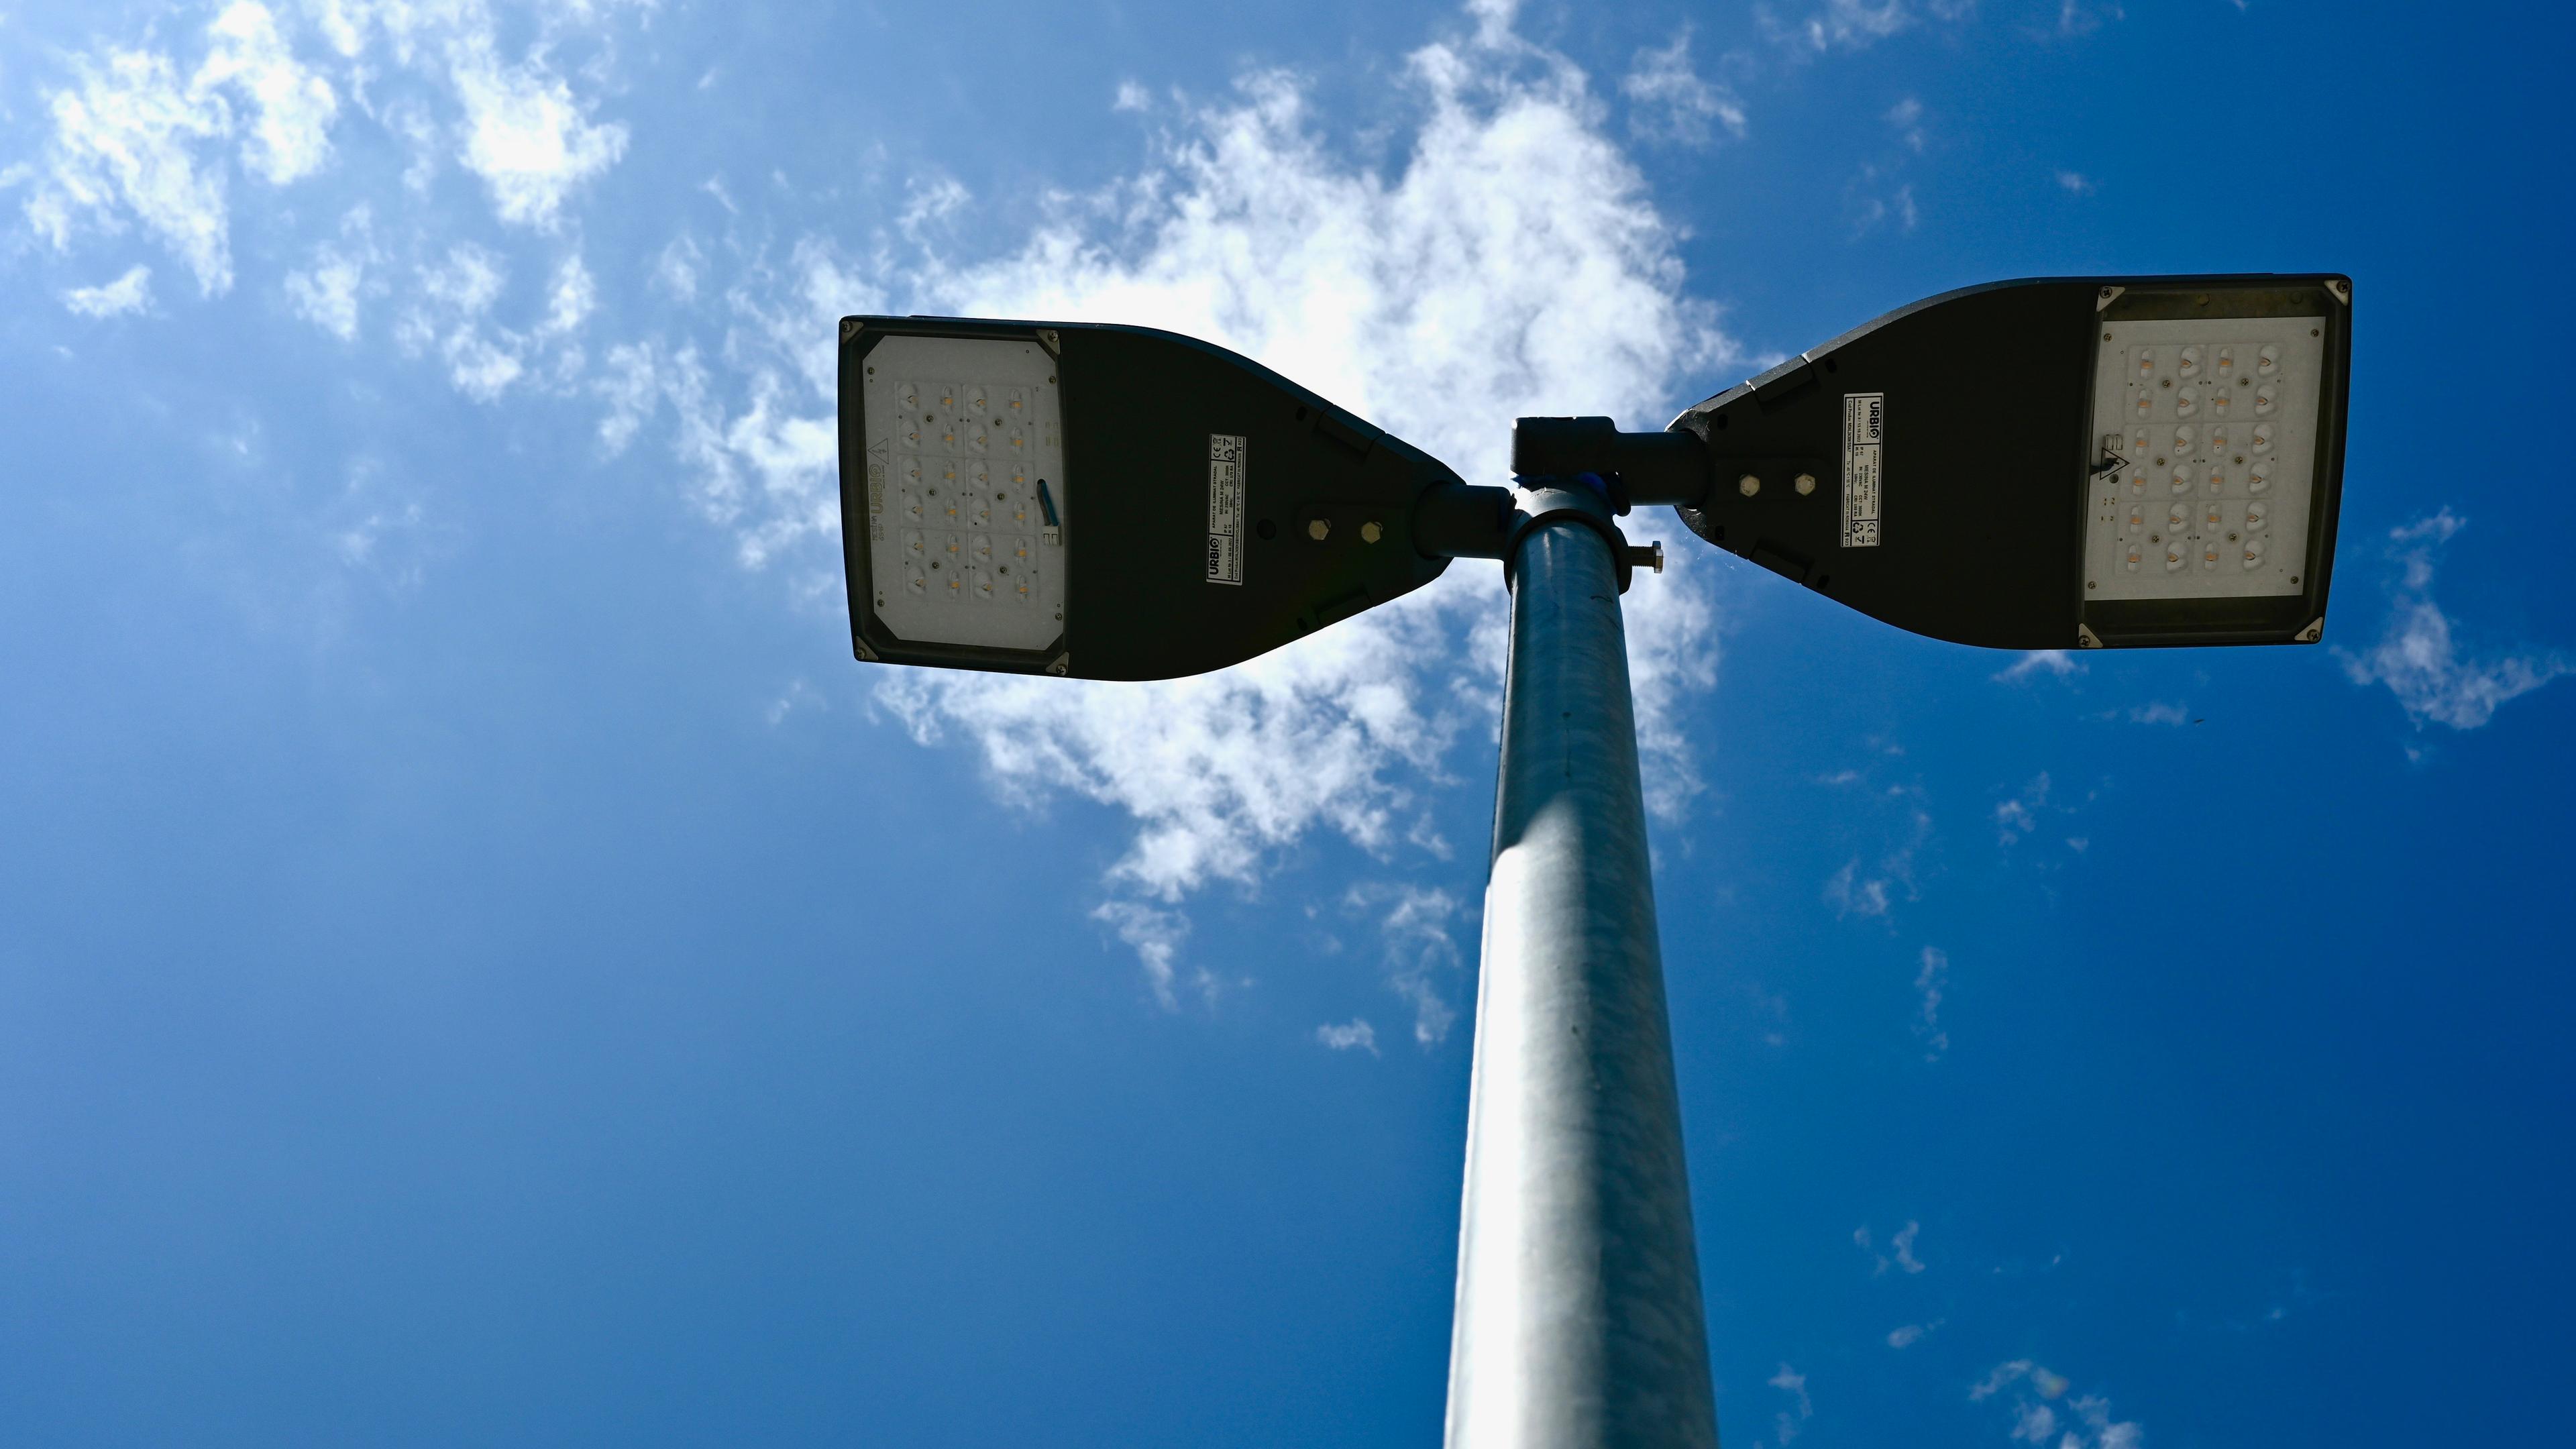 A picture of the street lightning from down below looking up underneath the street lightning, enabling us to see the LED technology used in the street lightening